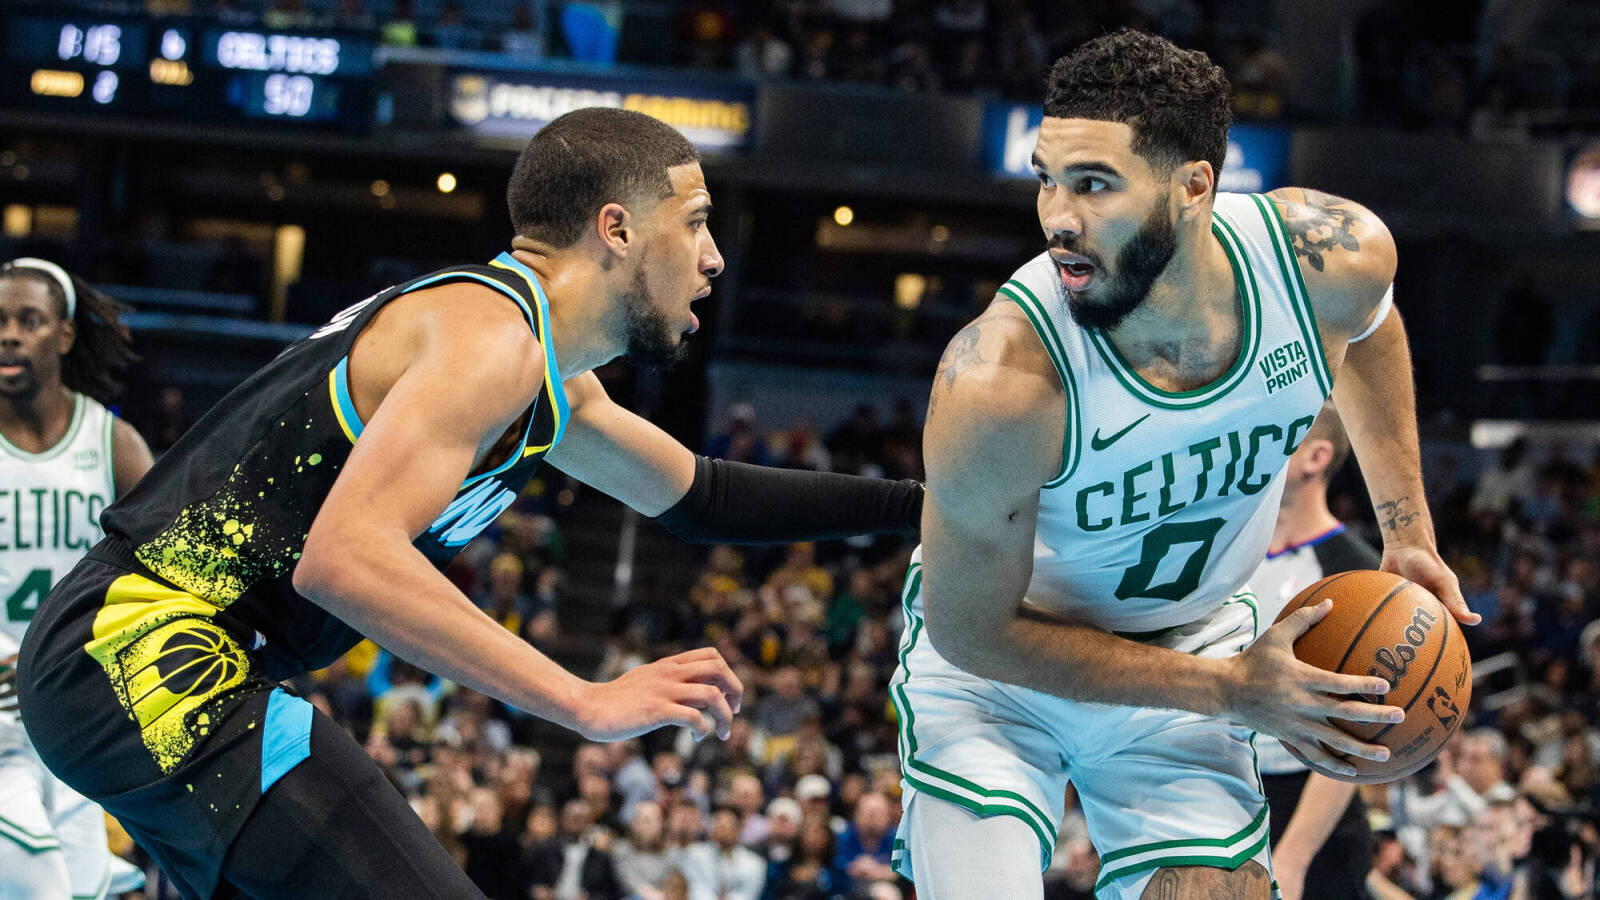 The Celtics-Pacers series could set all sorts of scoring records